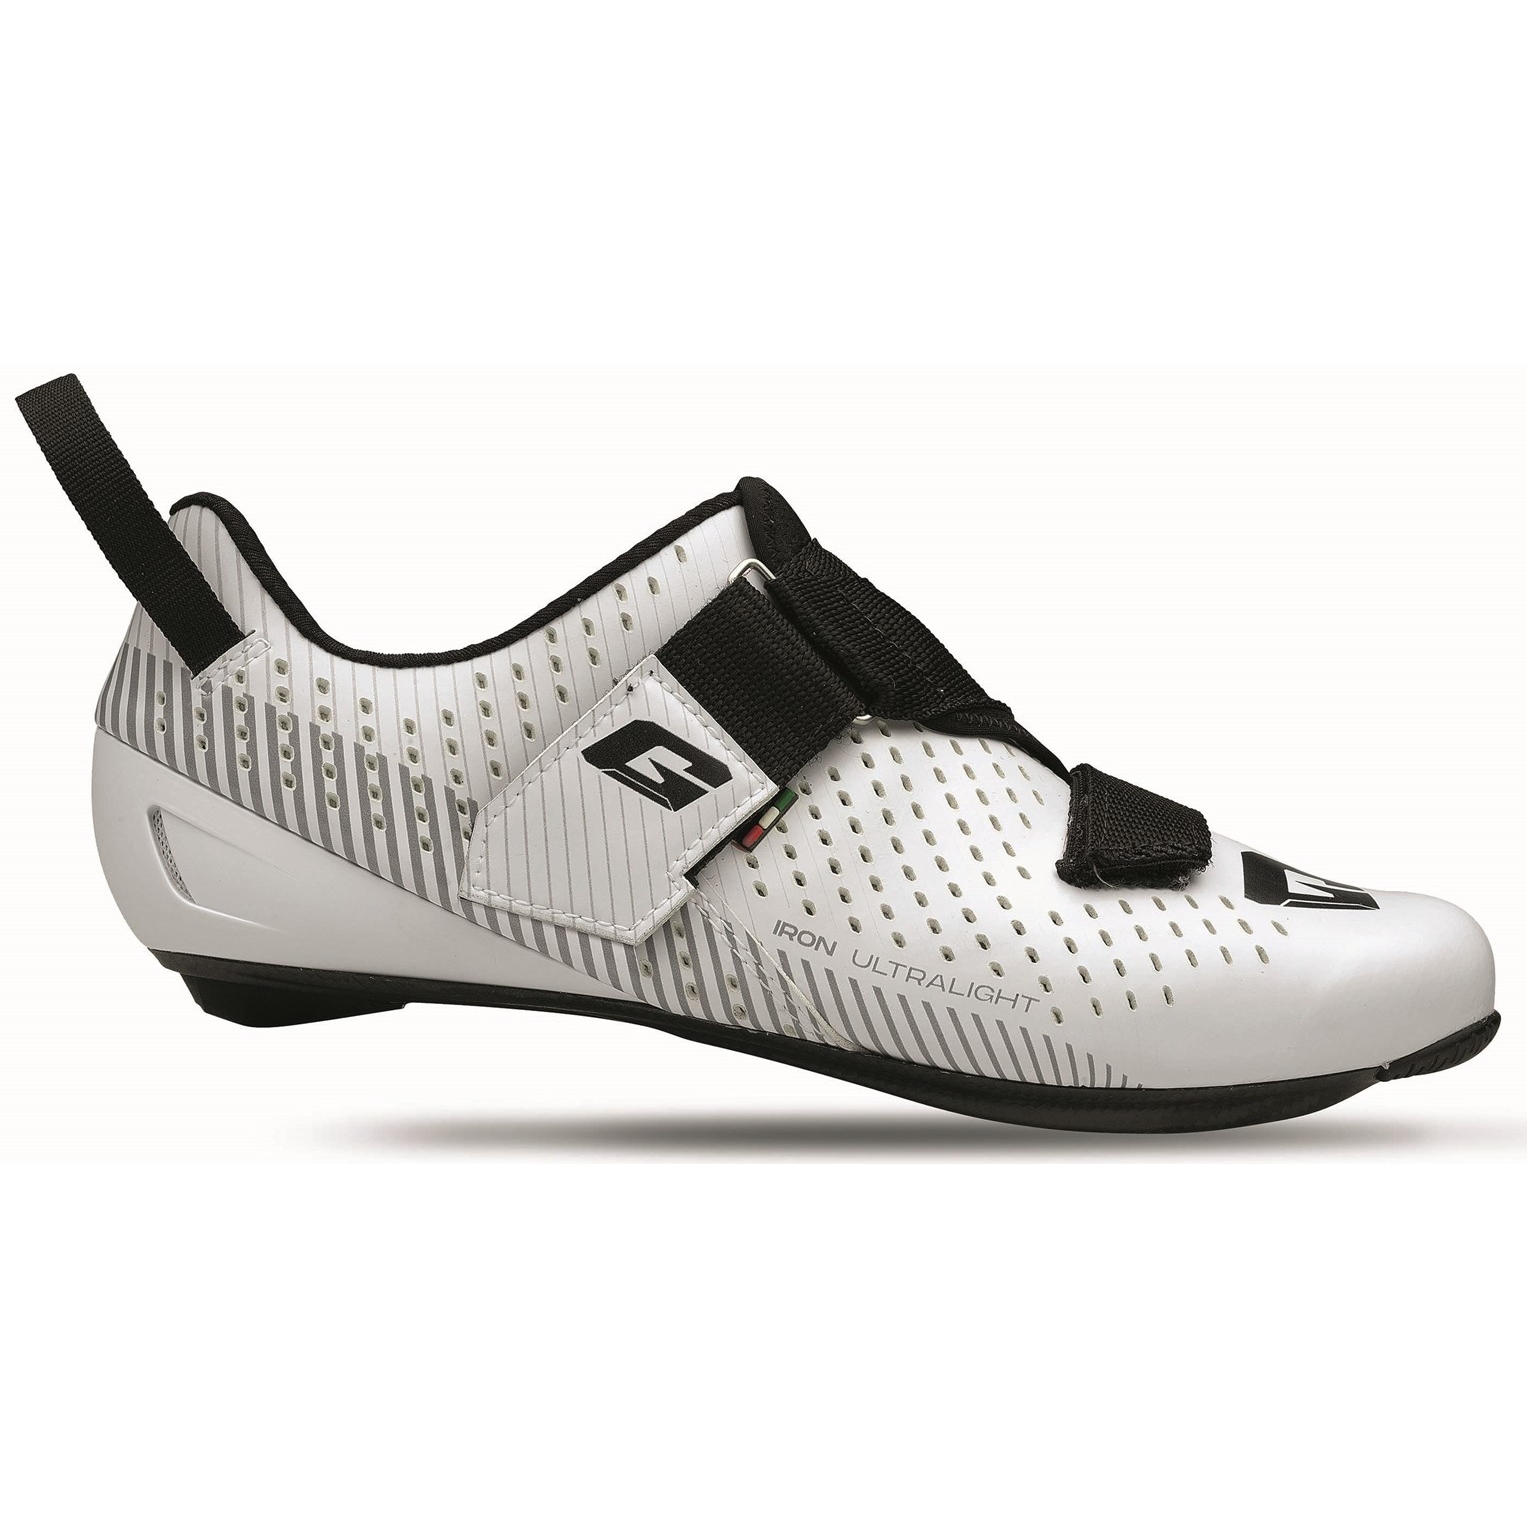 Picture of Gaerne G.Iron Triathlon Road Shoes - White